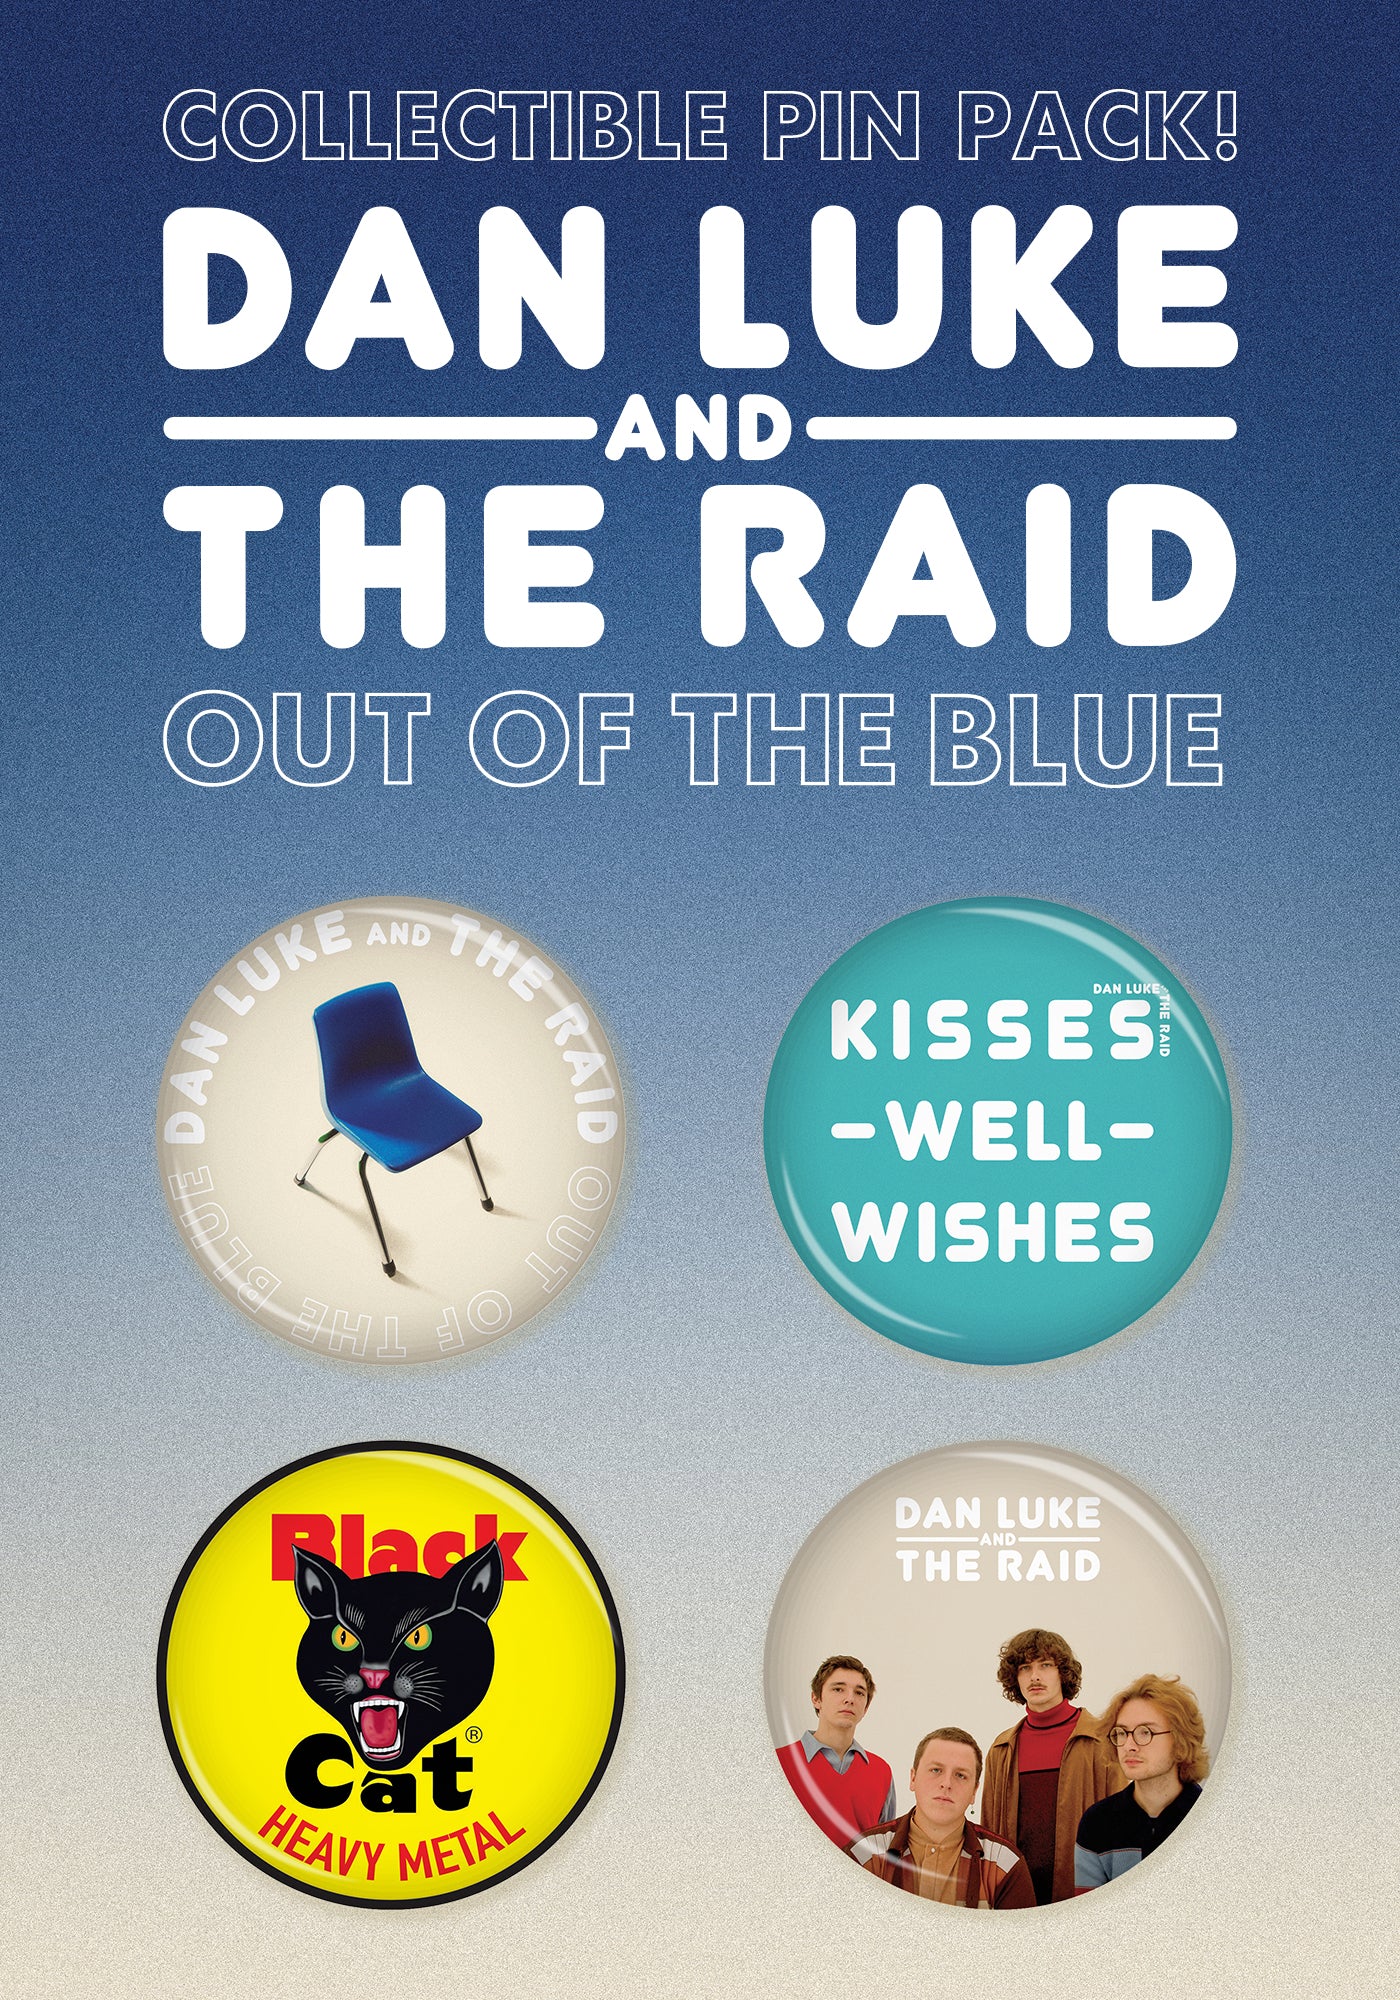 Dan Luke and The Raid - Out Of The Blue Button Pack